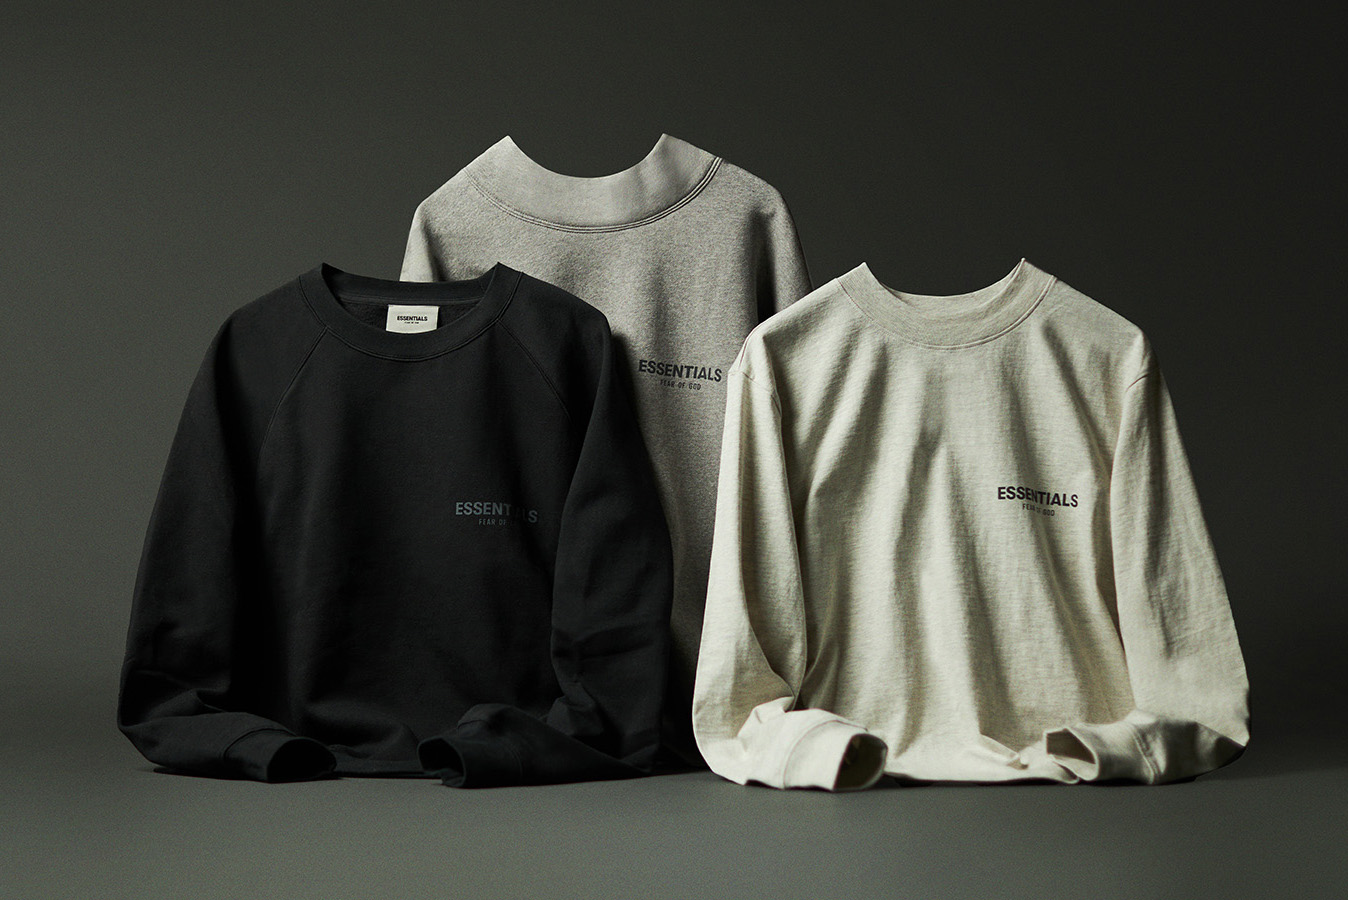 THE FEAR OF GOD ESSENTIALS CORE COLLECTION